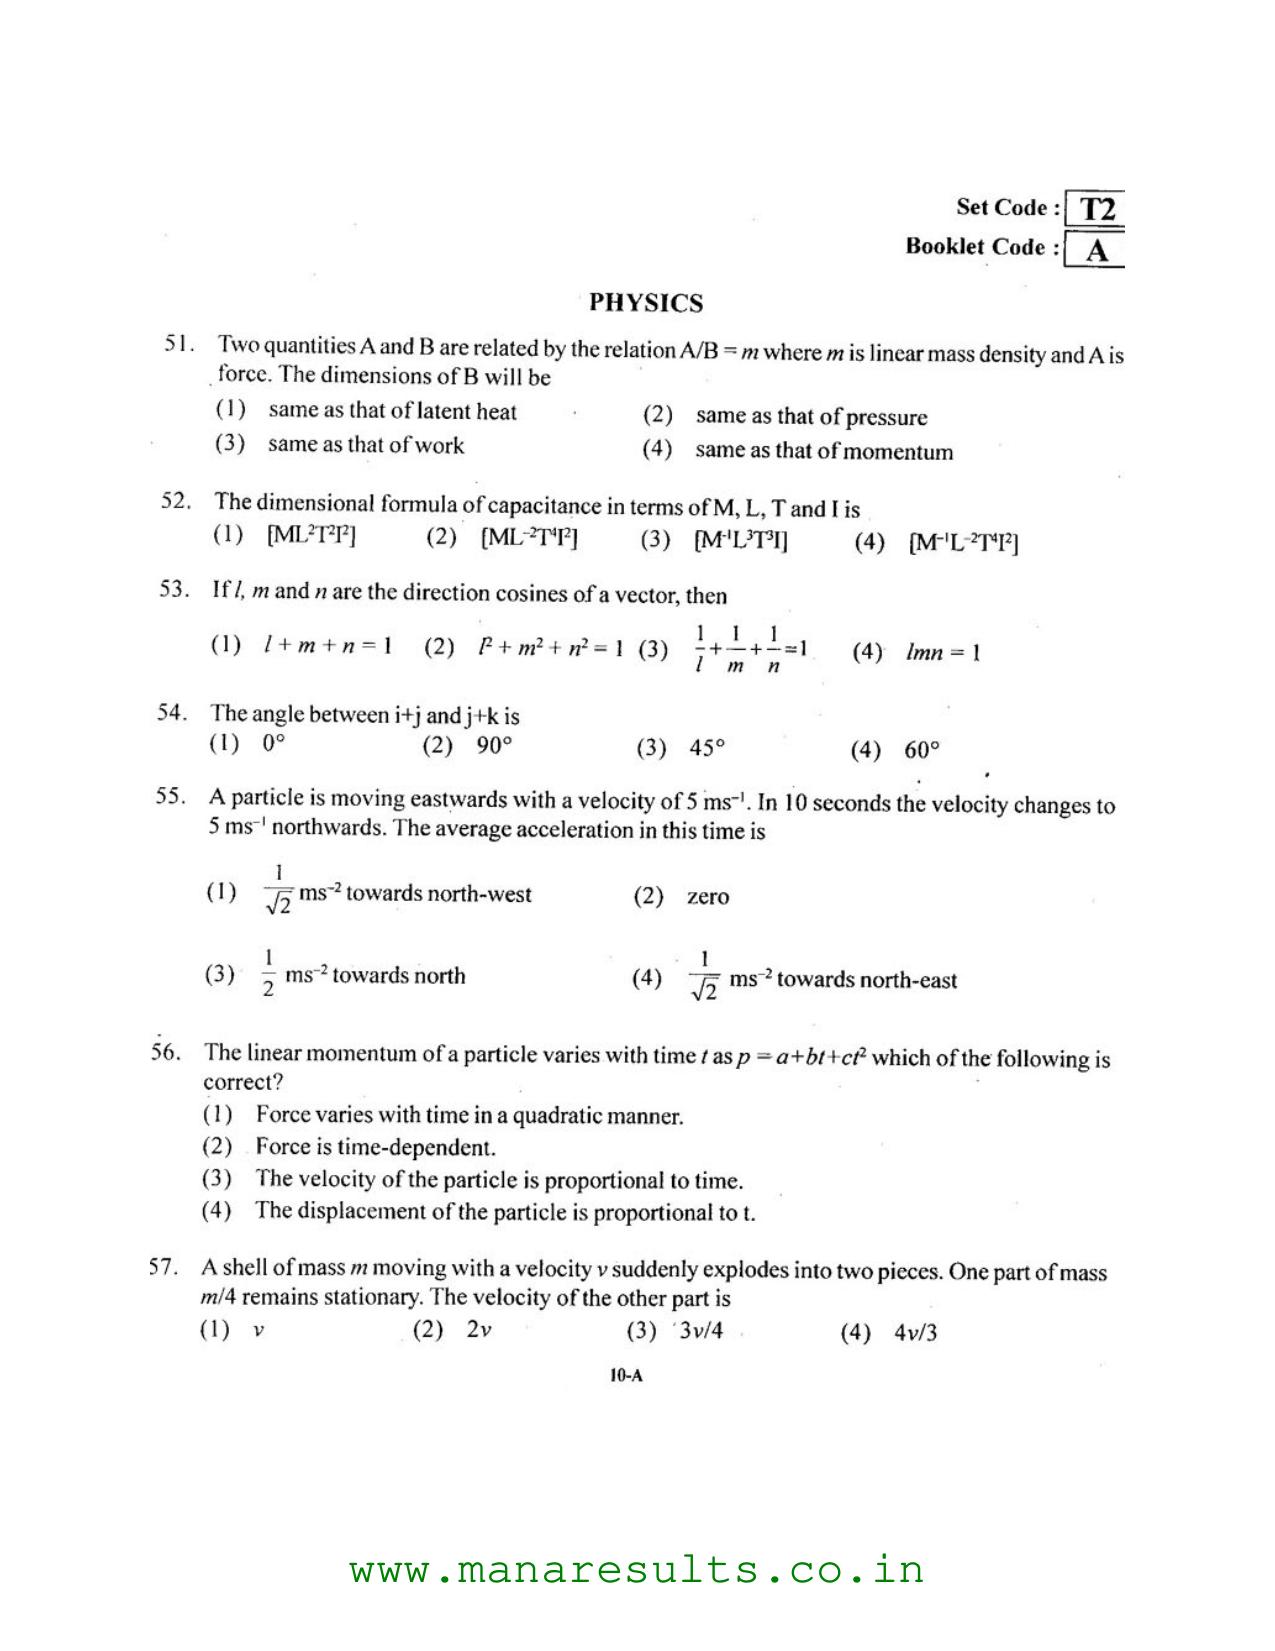 AP ECET 2016 Mining Engineering Old Previous Question Papers - Page 9